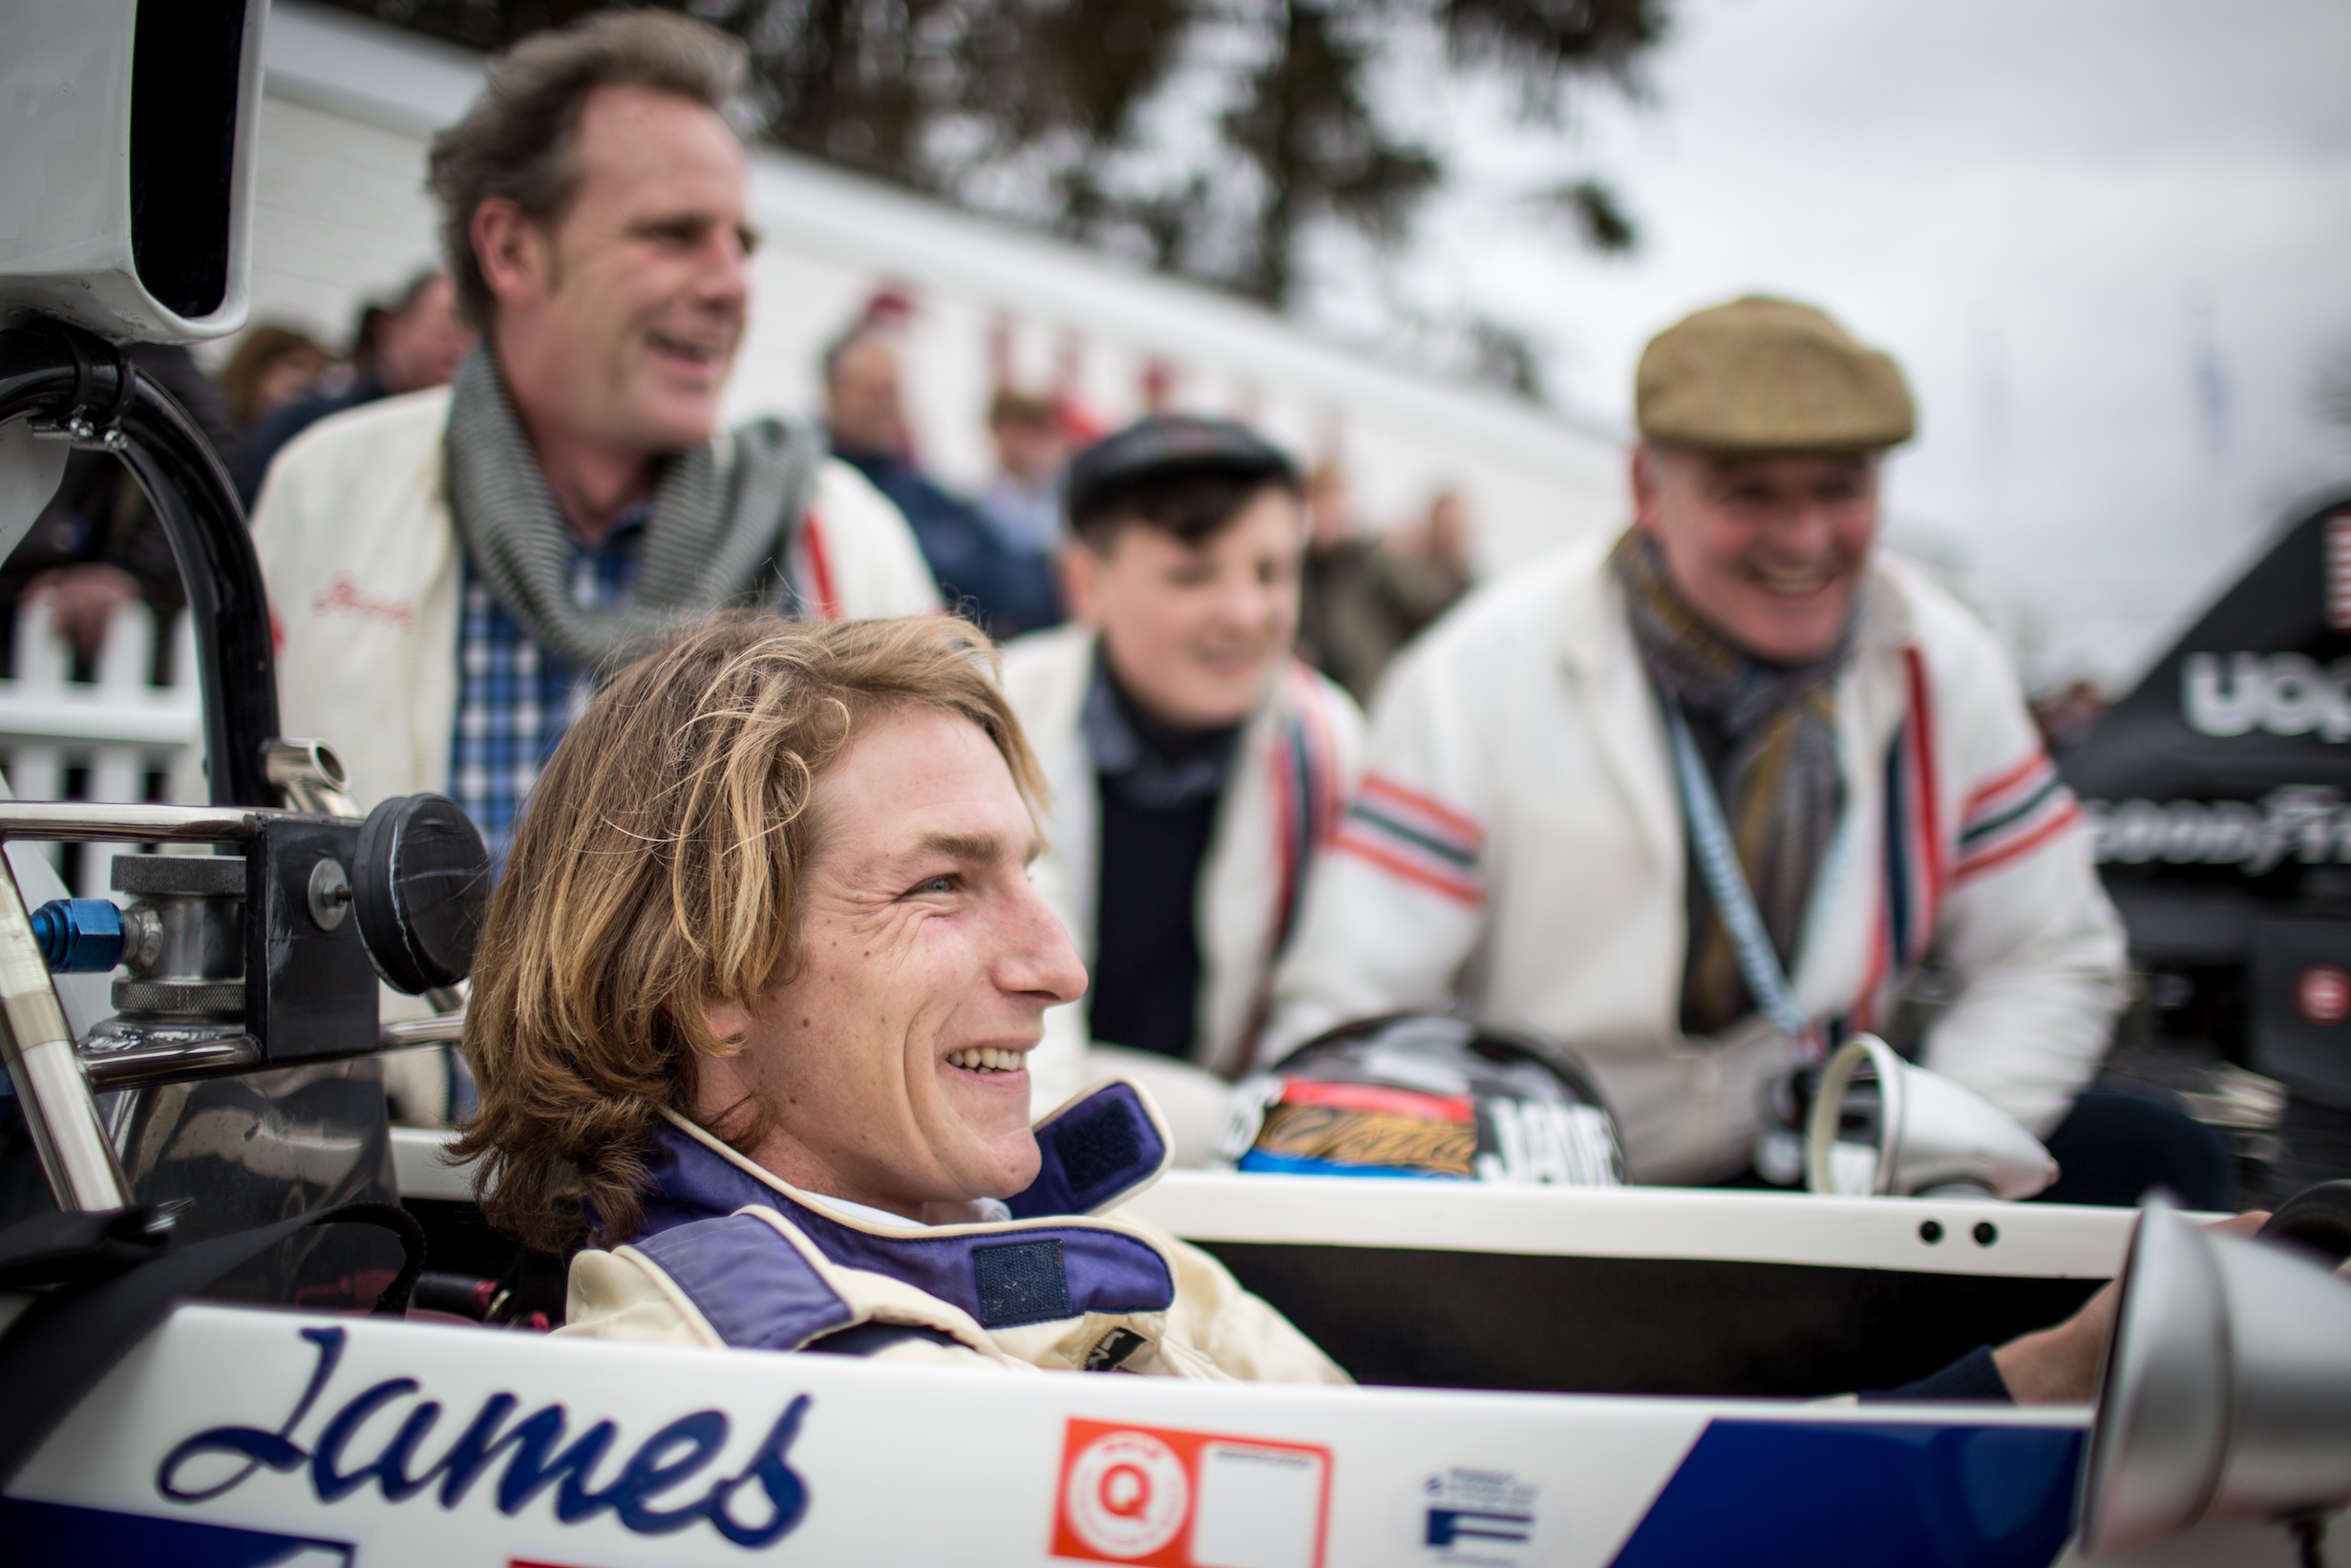 1970s F1 cars, Freddie Hunt and a classic 911 race cause a stir at Goodwood 73rd Members’ Meeting